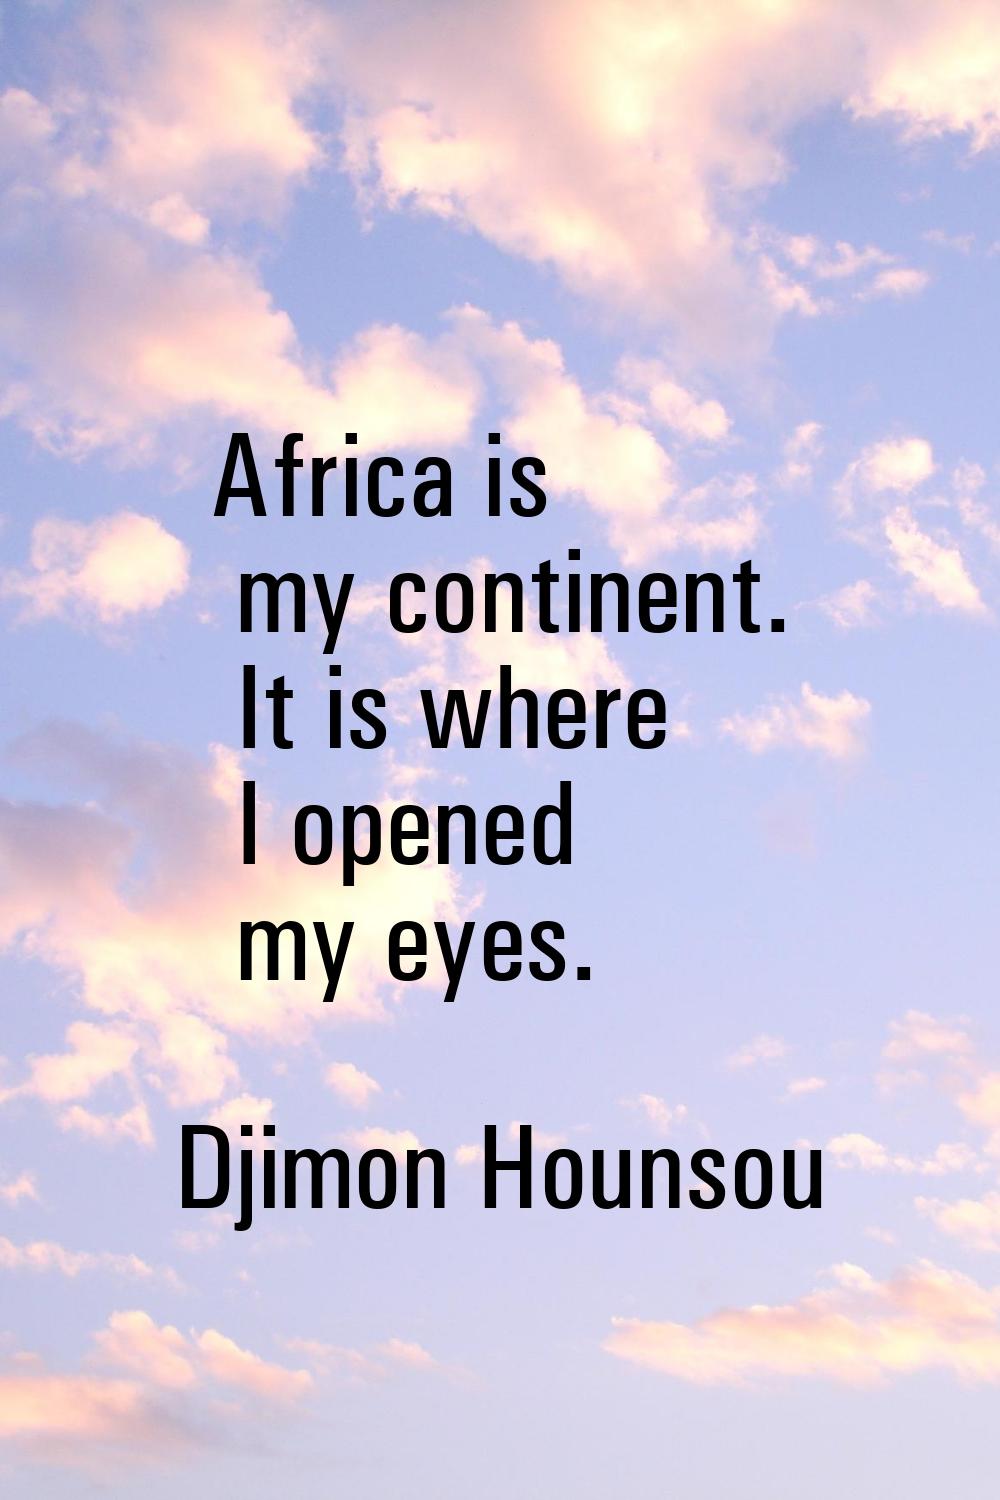 Africa is my continent. It is where I opened my eyes.